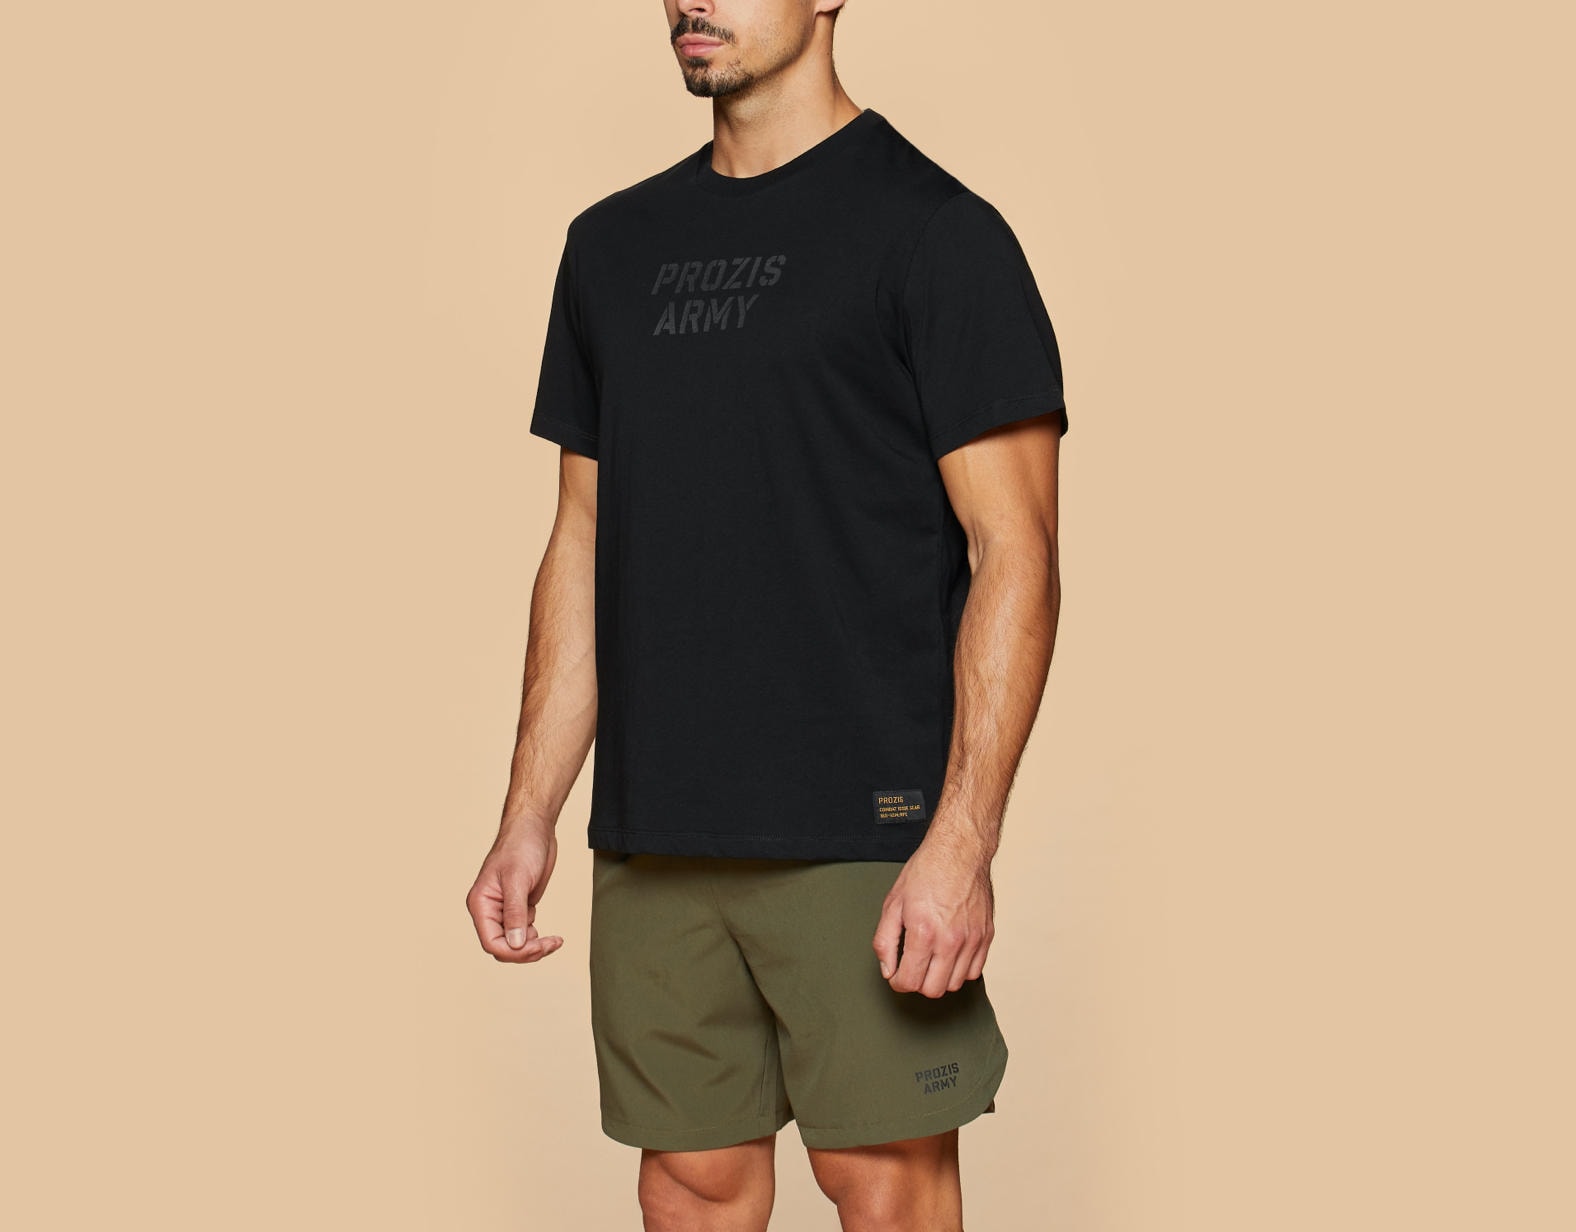 Short Sleeve T-Shirt ROTHCO 60136 S-2X OD  with Black Letters Army T-Shirt 